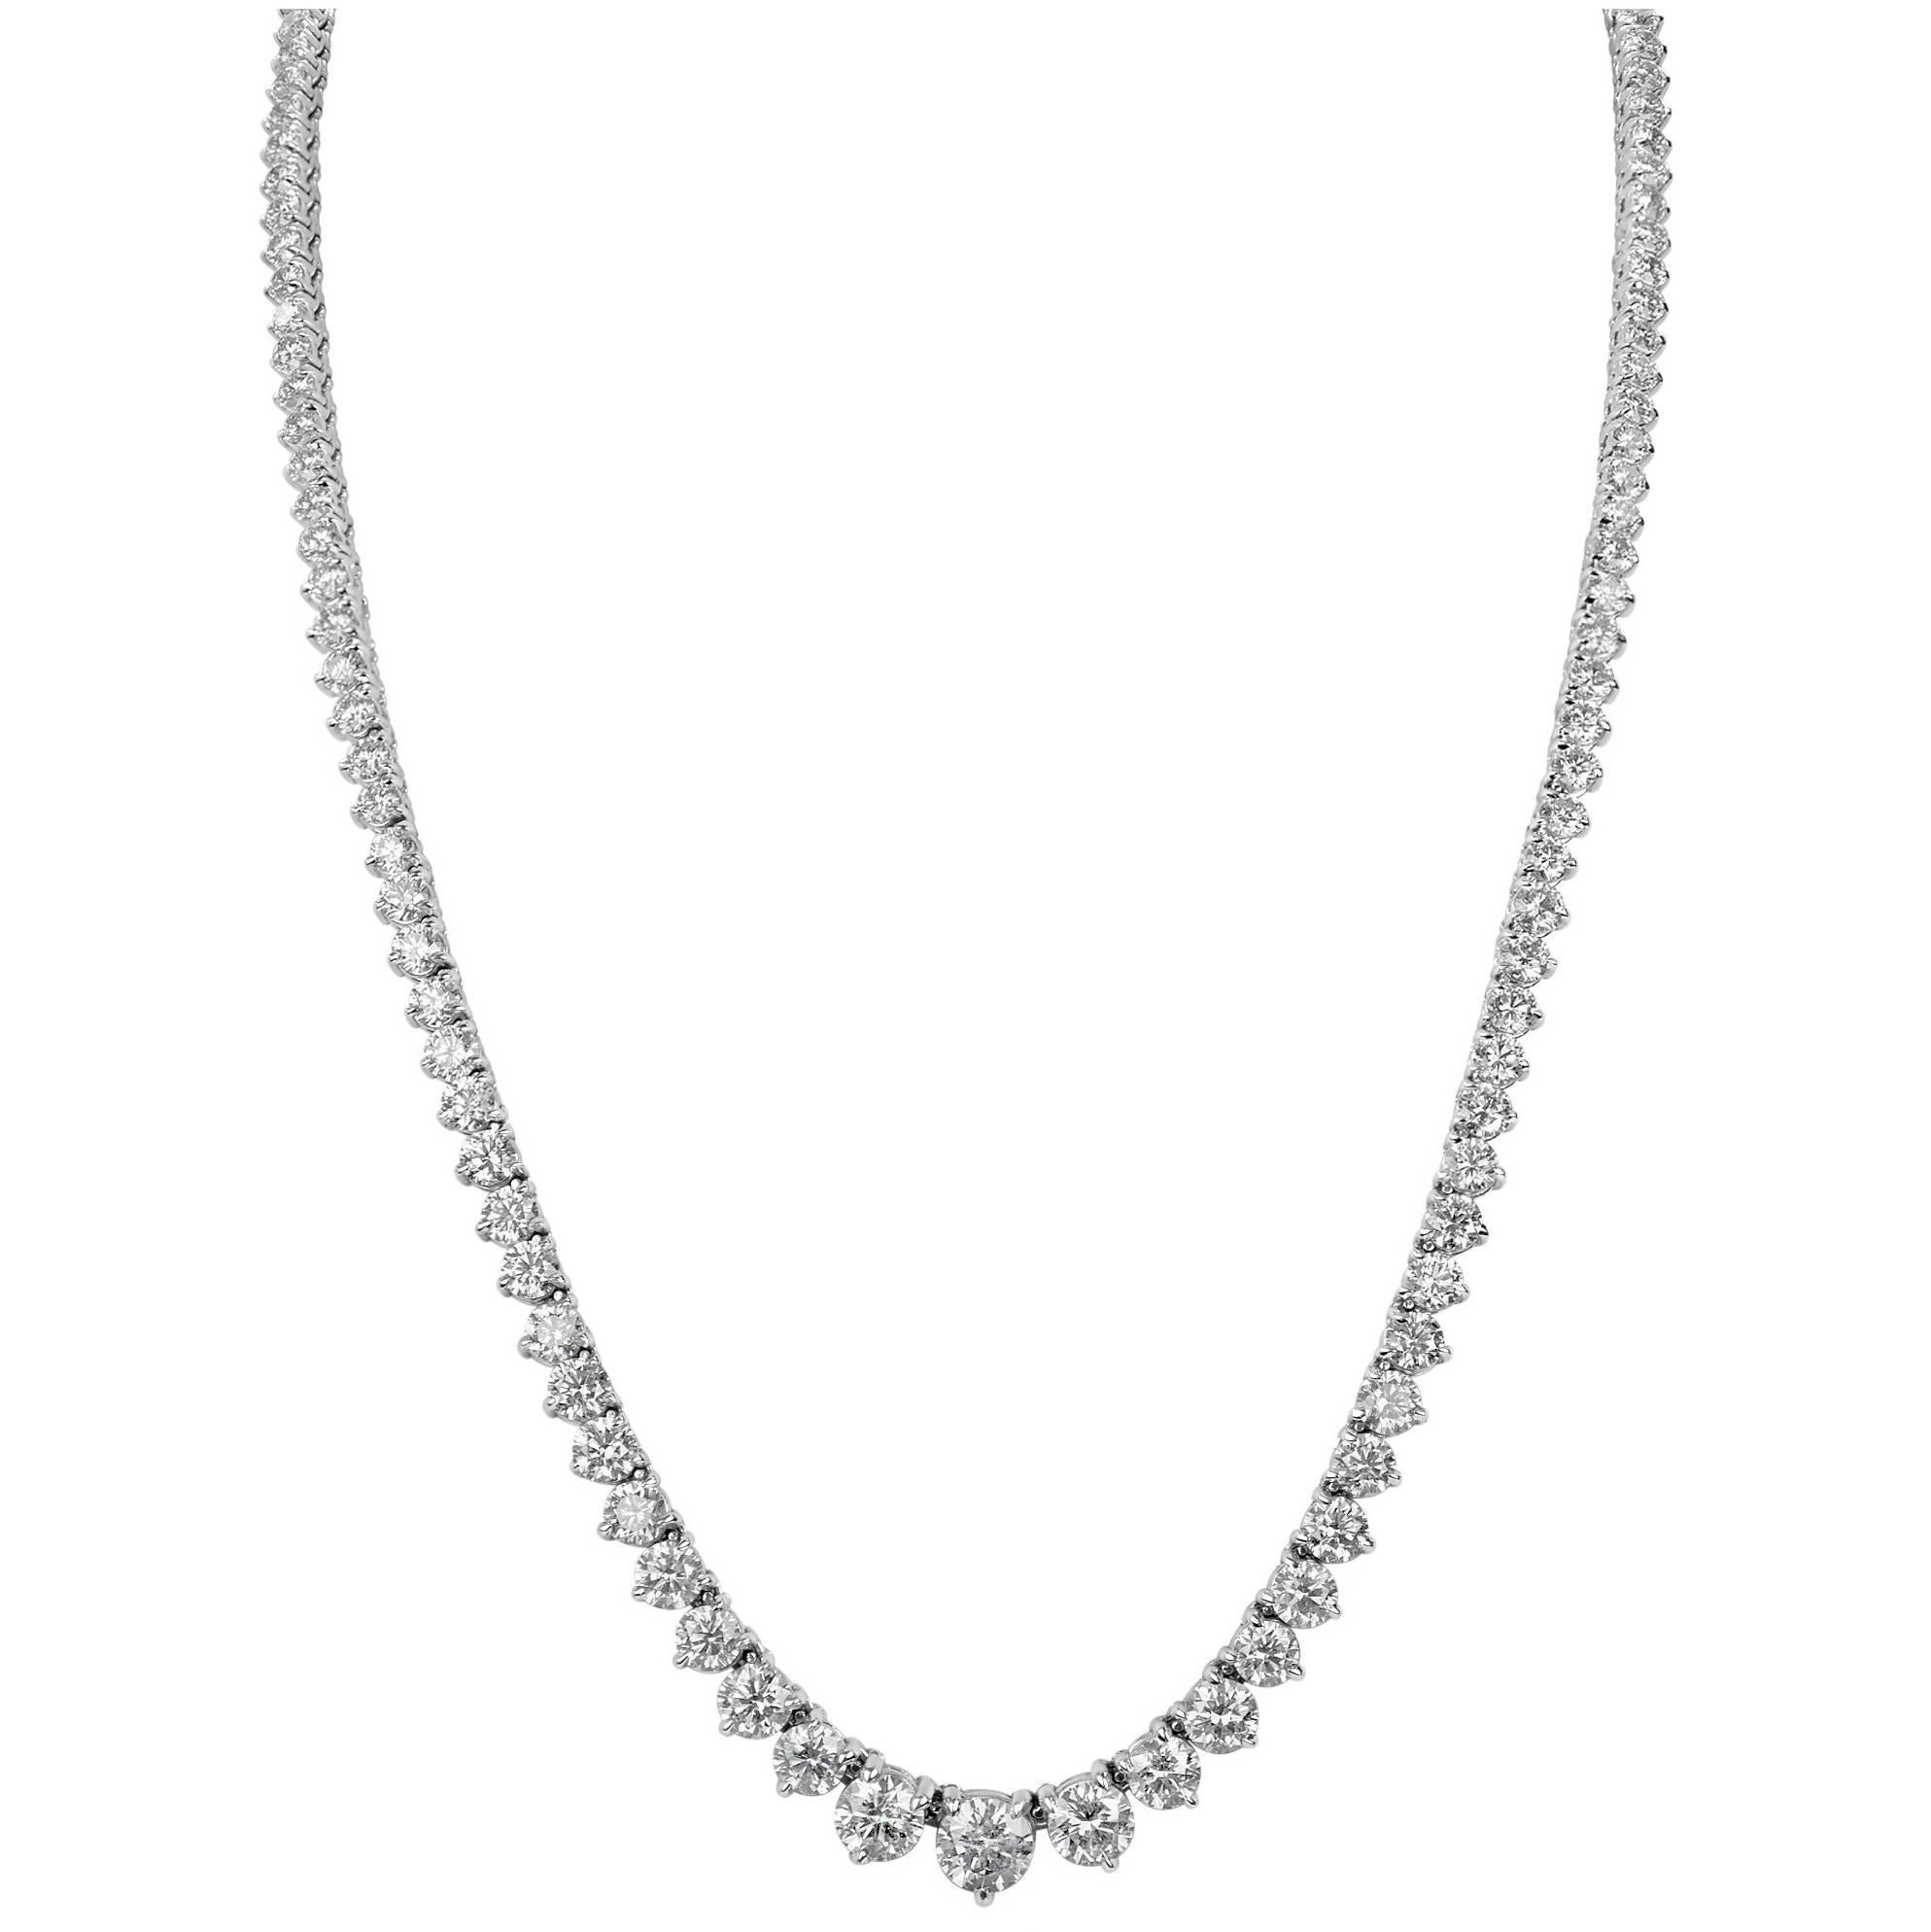 GIA Certified Graduated Diamond Riviera Necklace 11 Carats total weight